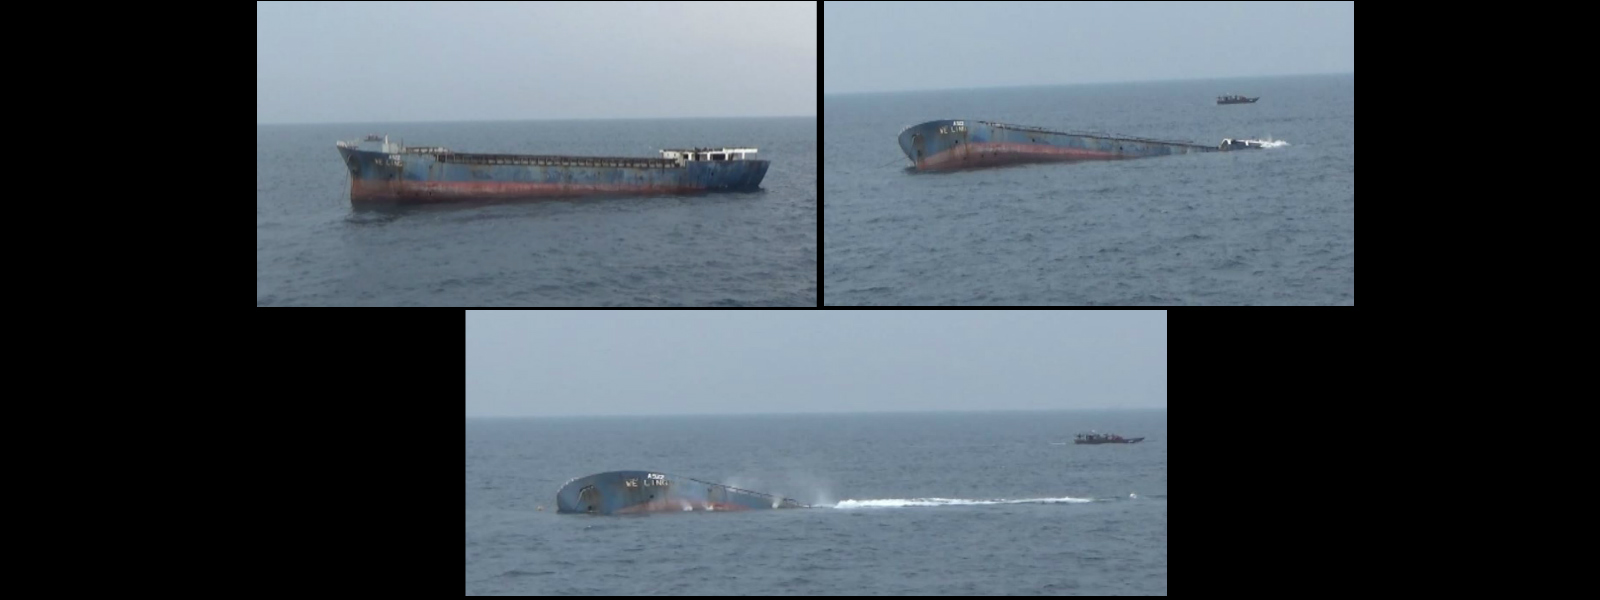 SL Navy sinks damaged ship used by KP